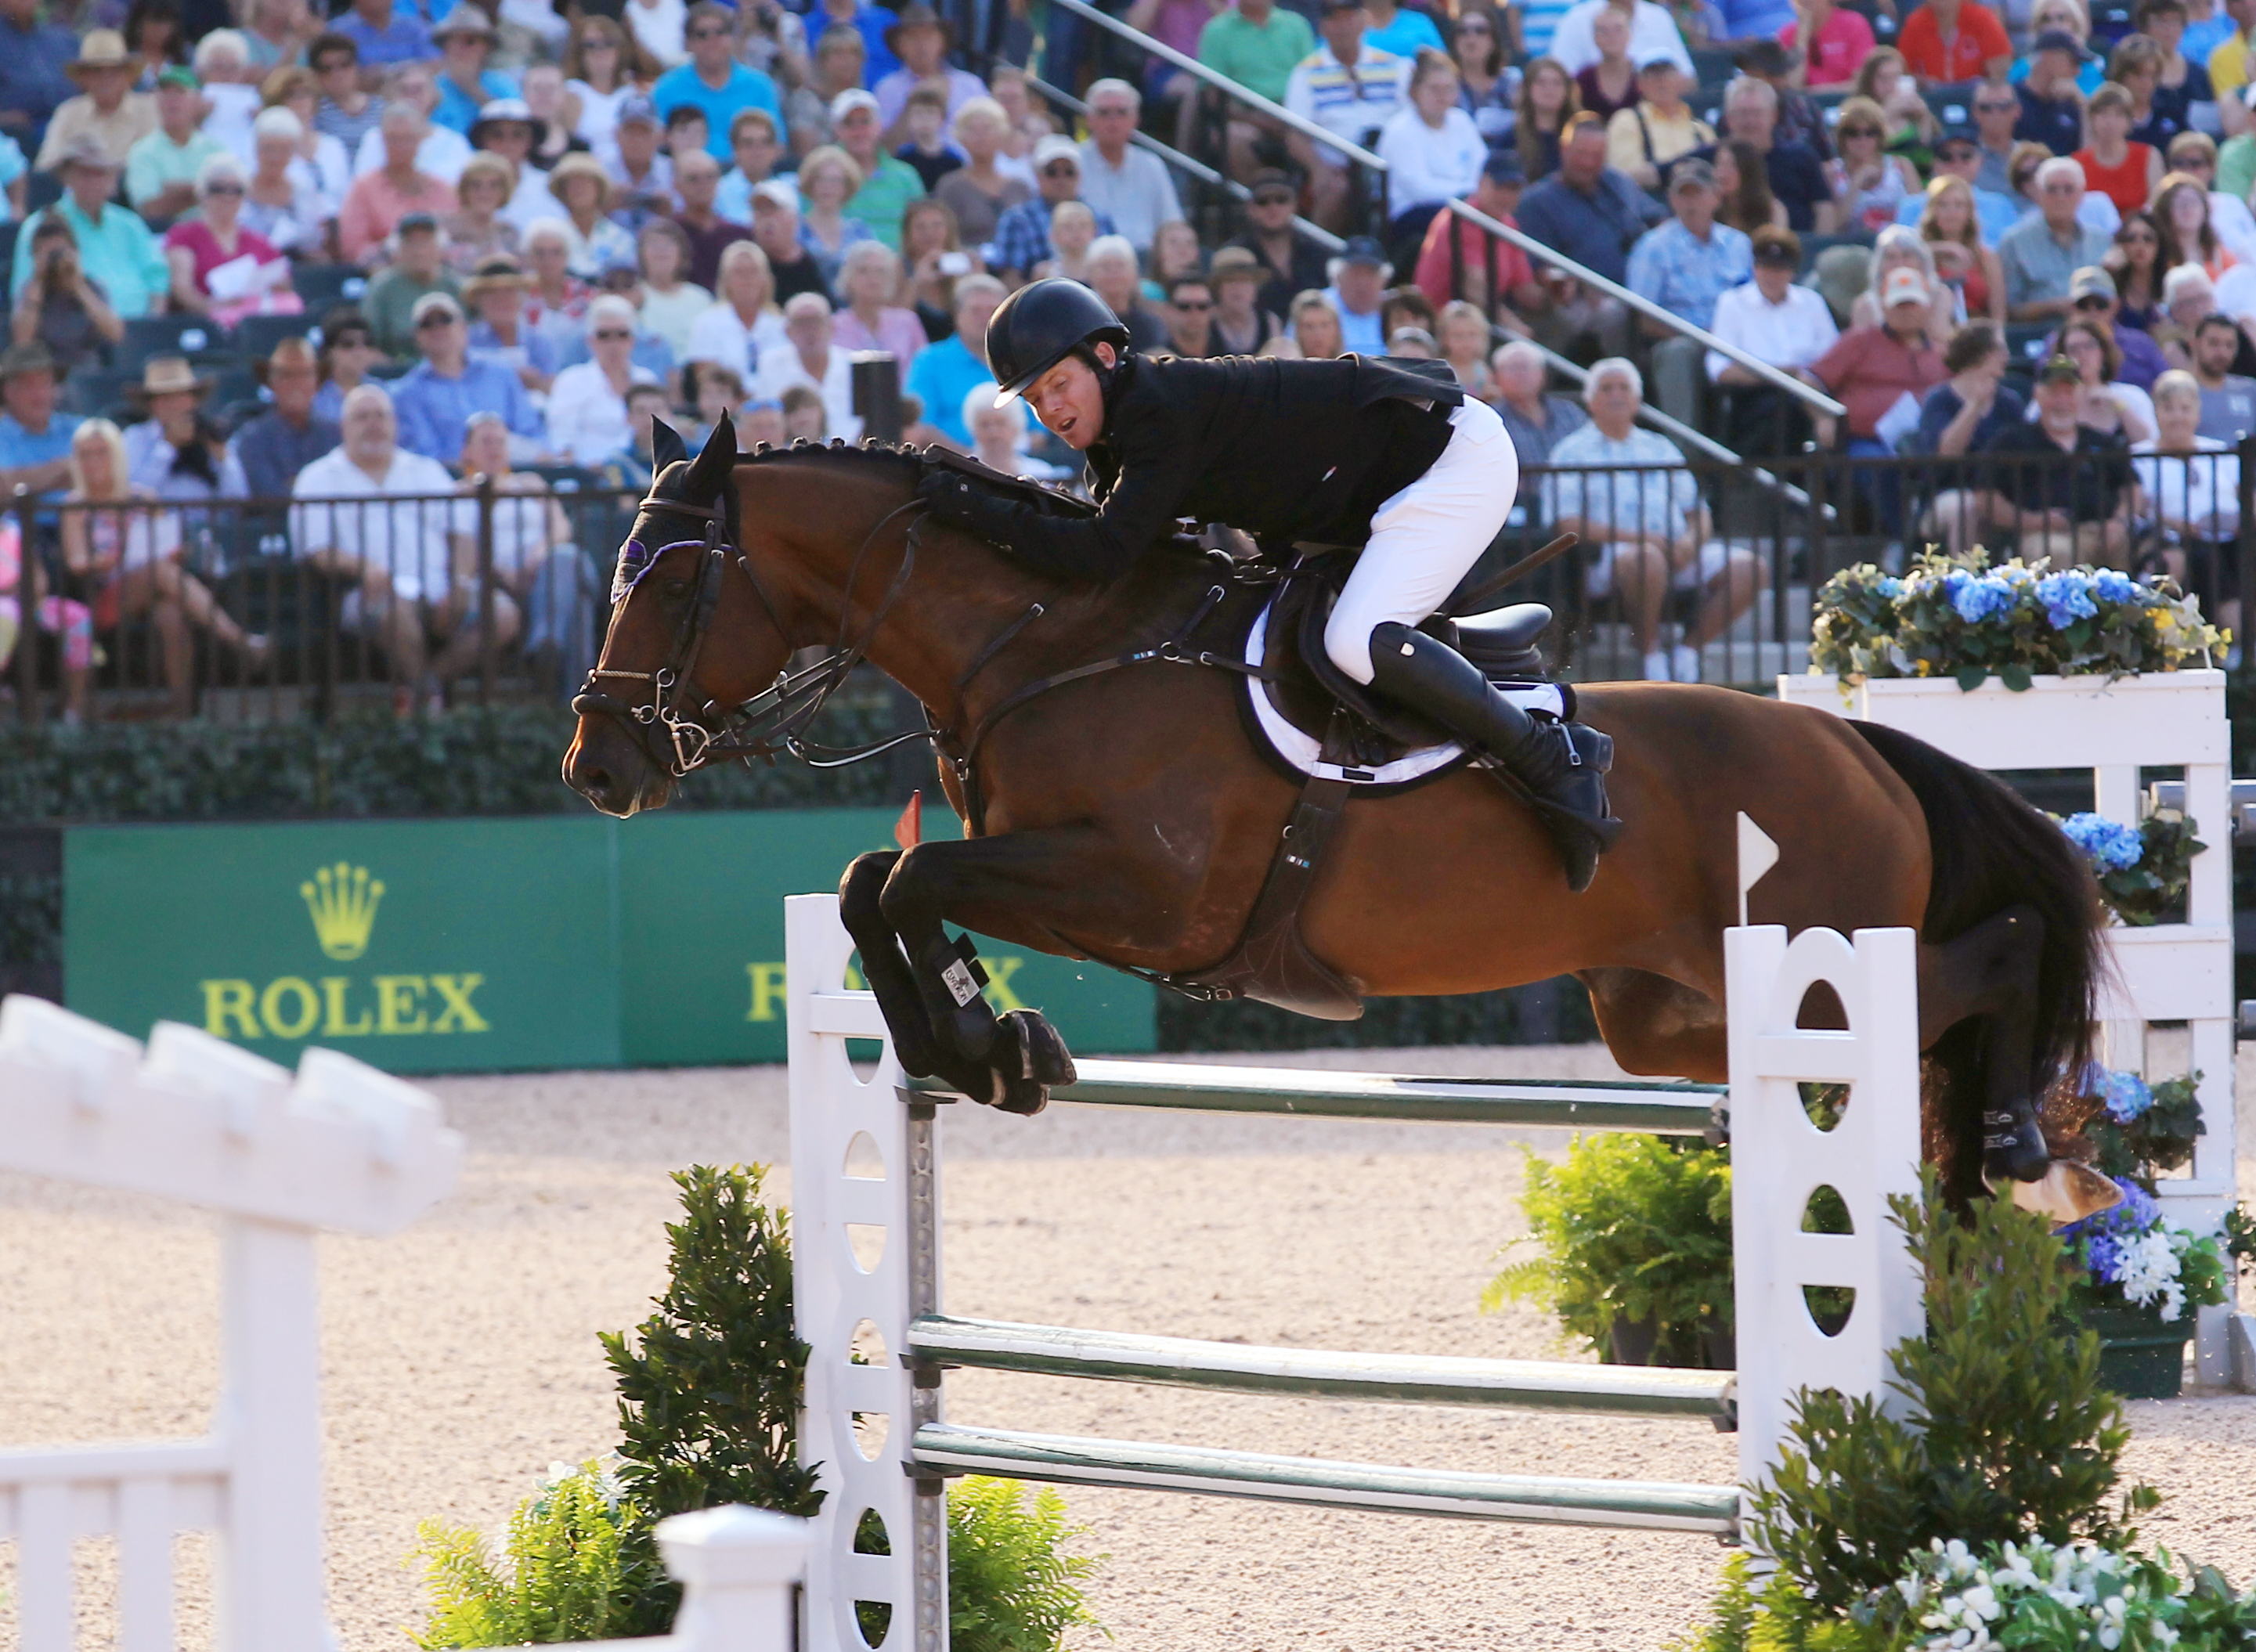 Tryon has equestrian industry growth Wellington could have